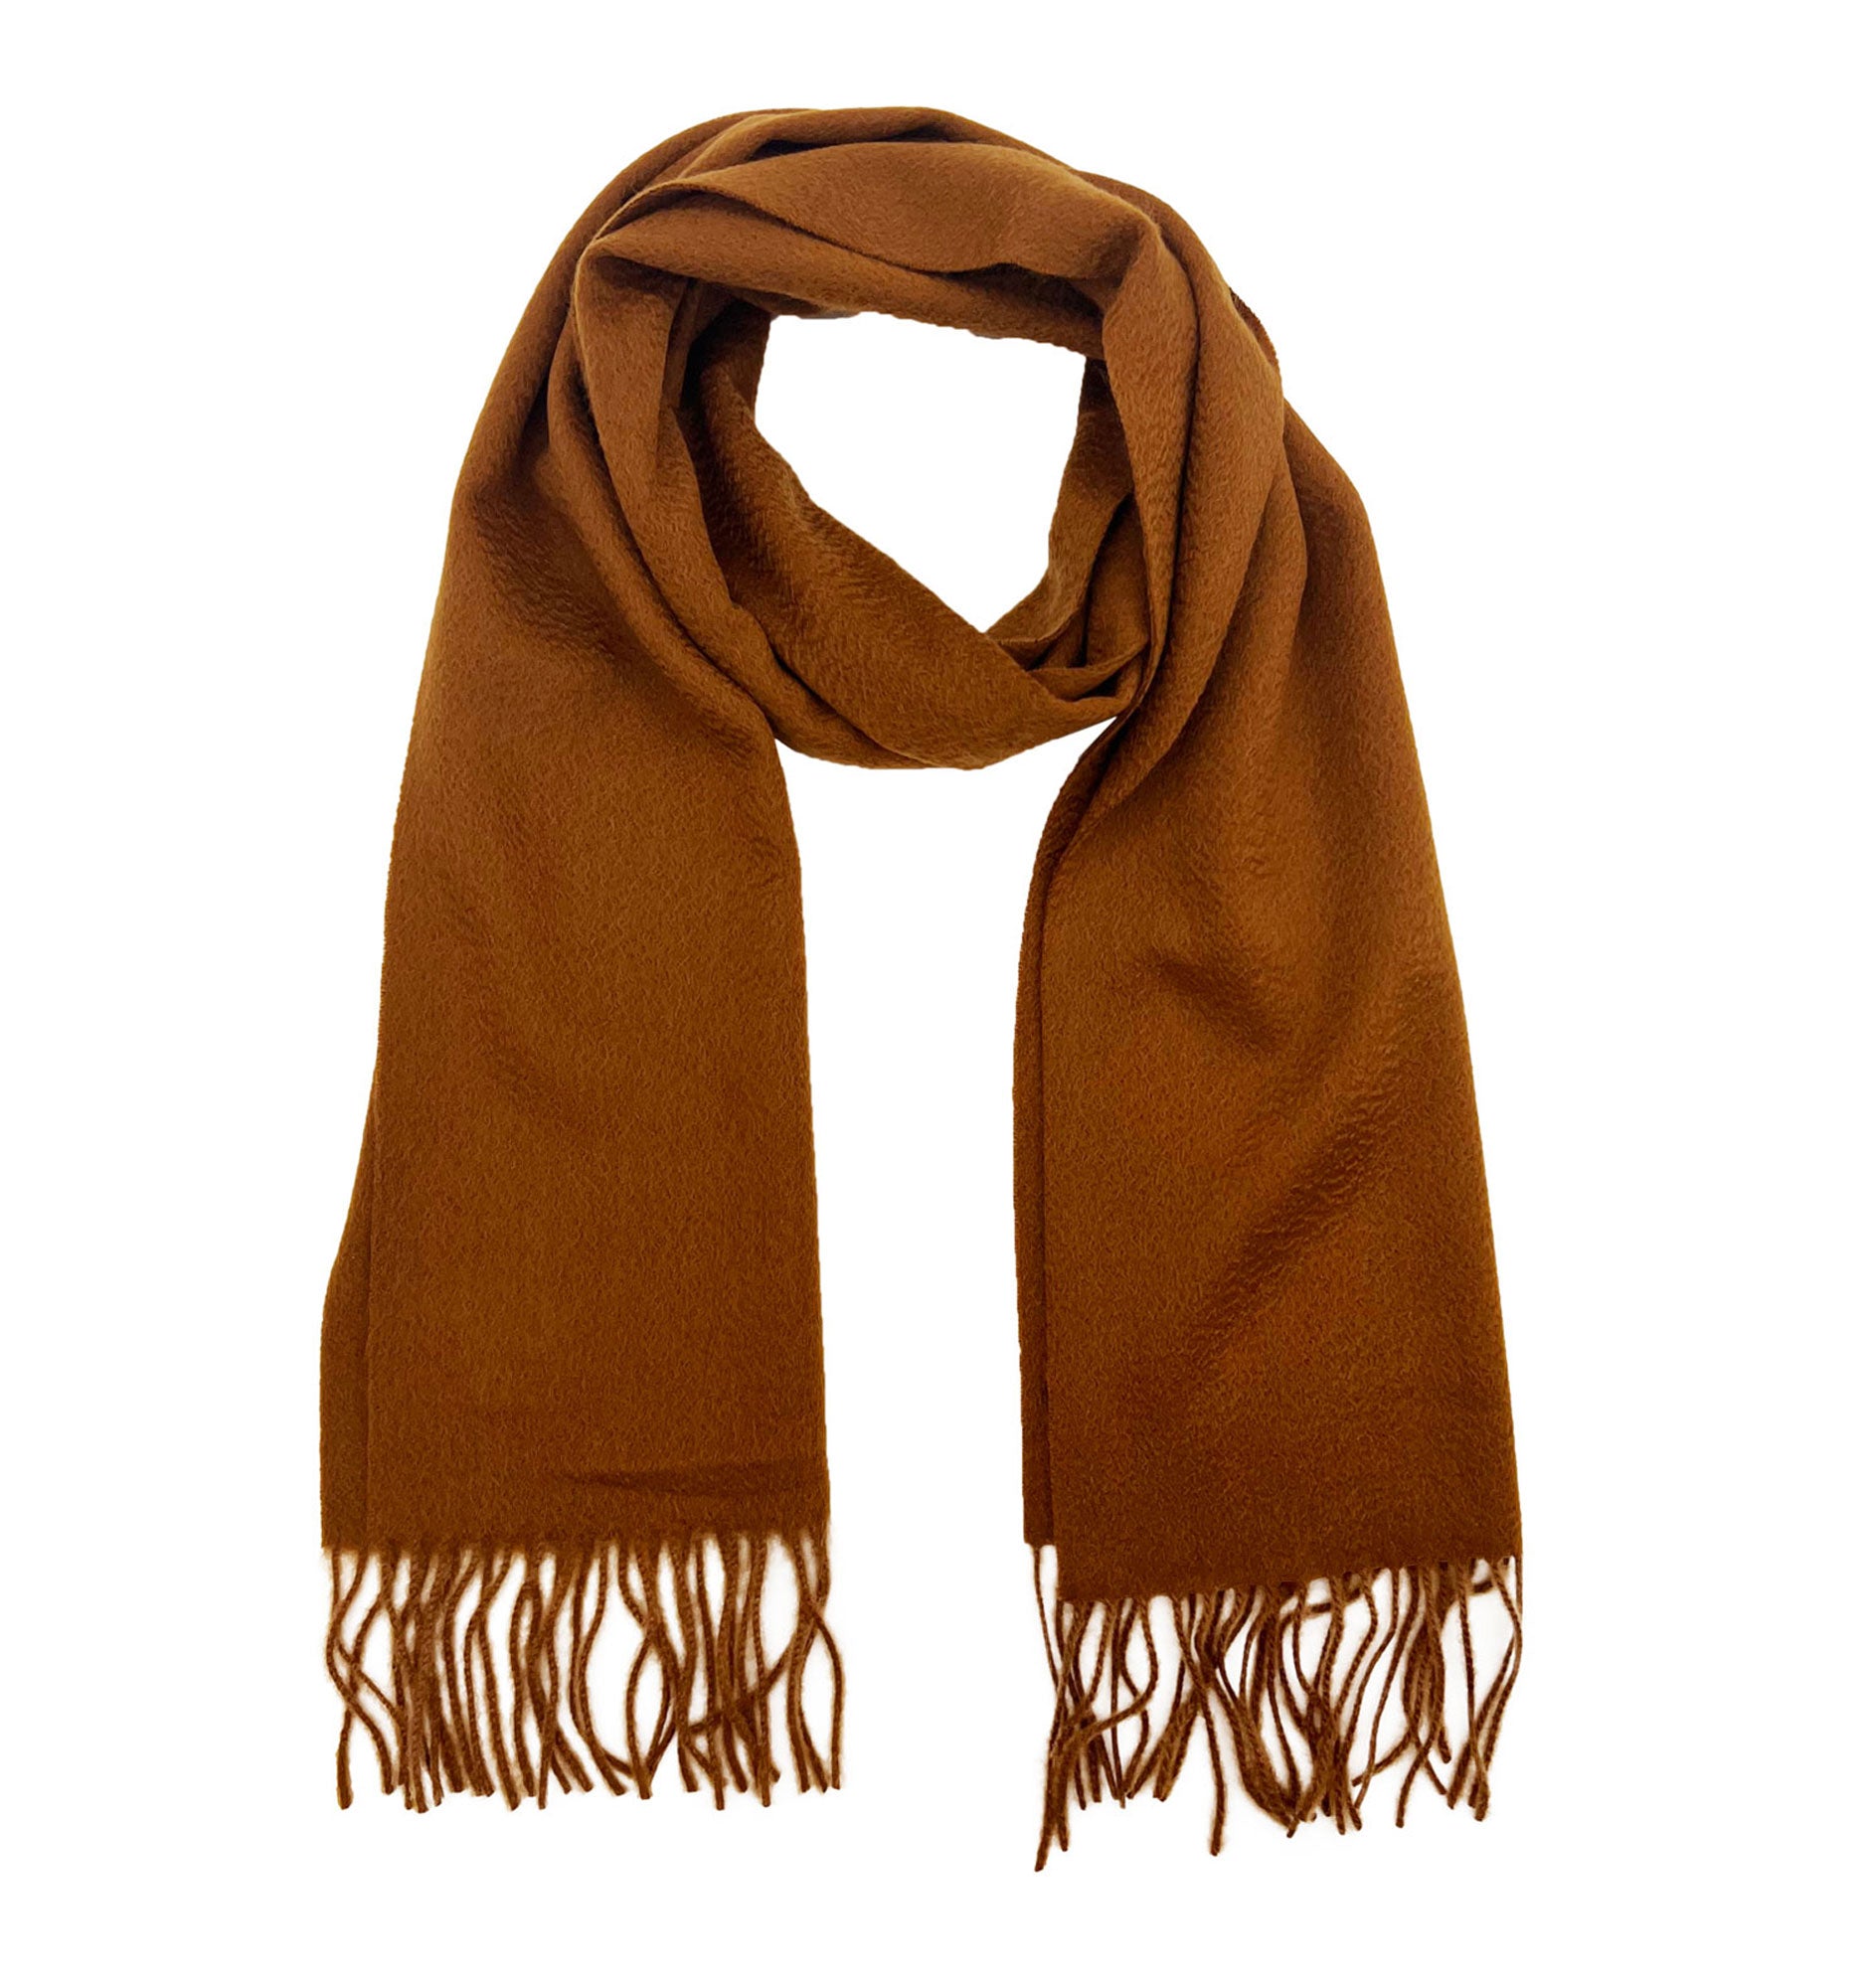 Looped camel-brown cashmere scarf with both ends parallel and tassles extended.